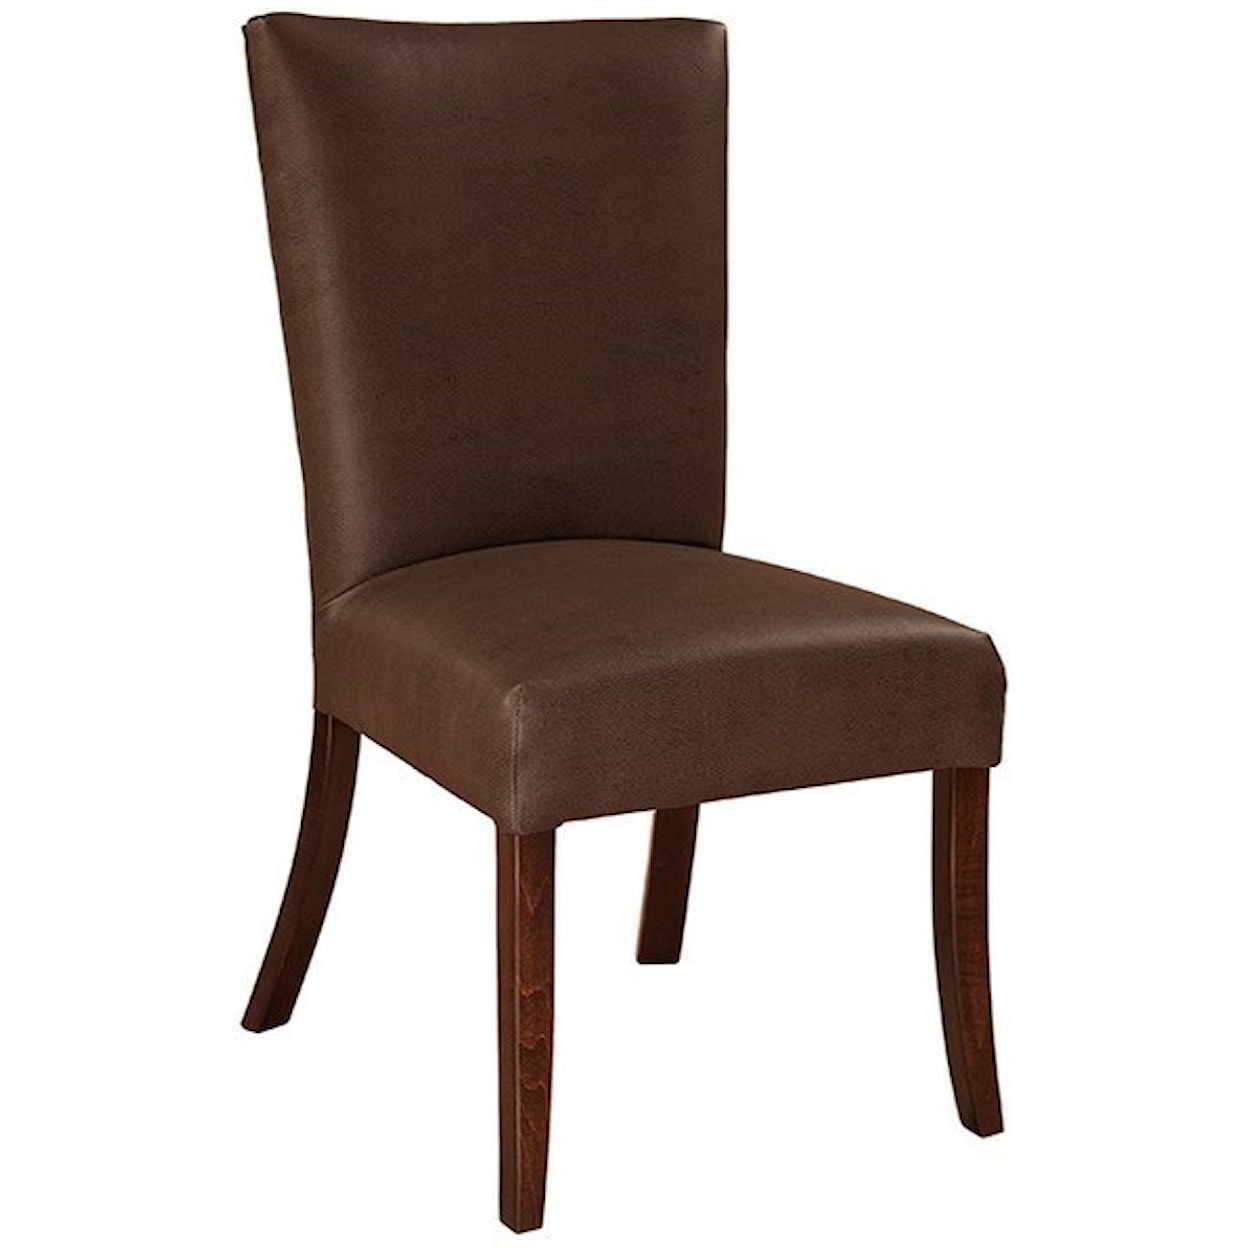 F&N Woodworking Trenton Customizable Solid Wood Side Chair